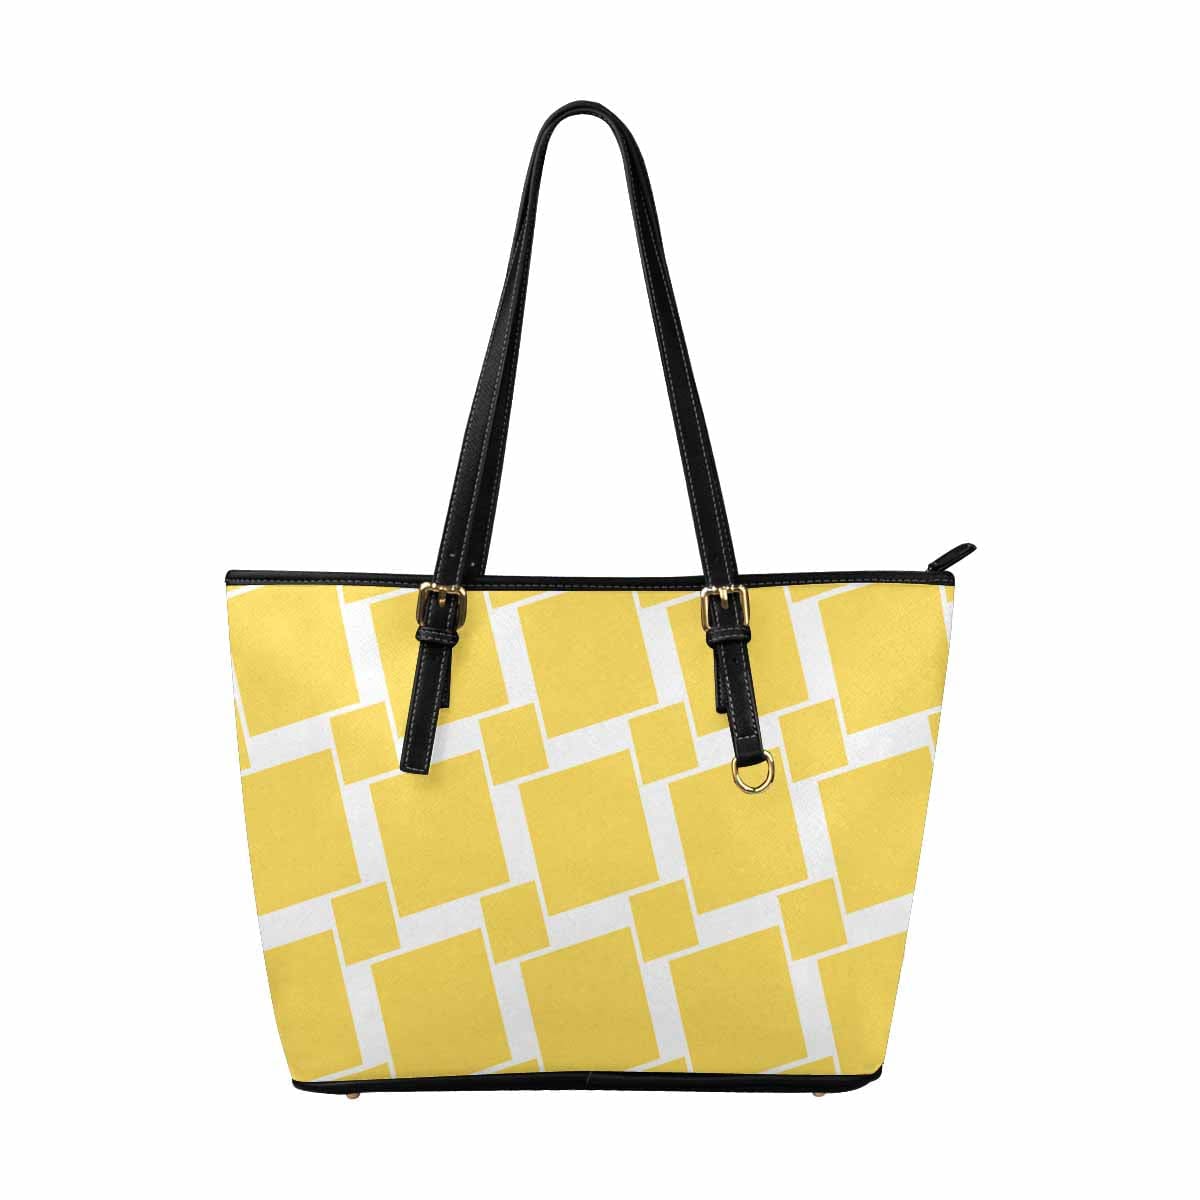 Large Leather Tote Shoulder Bag - Yellow - Bags | Leather Tote Bags